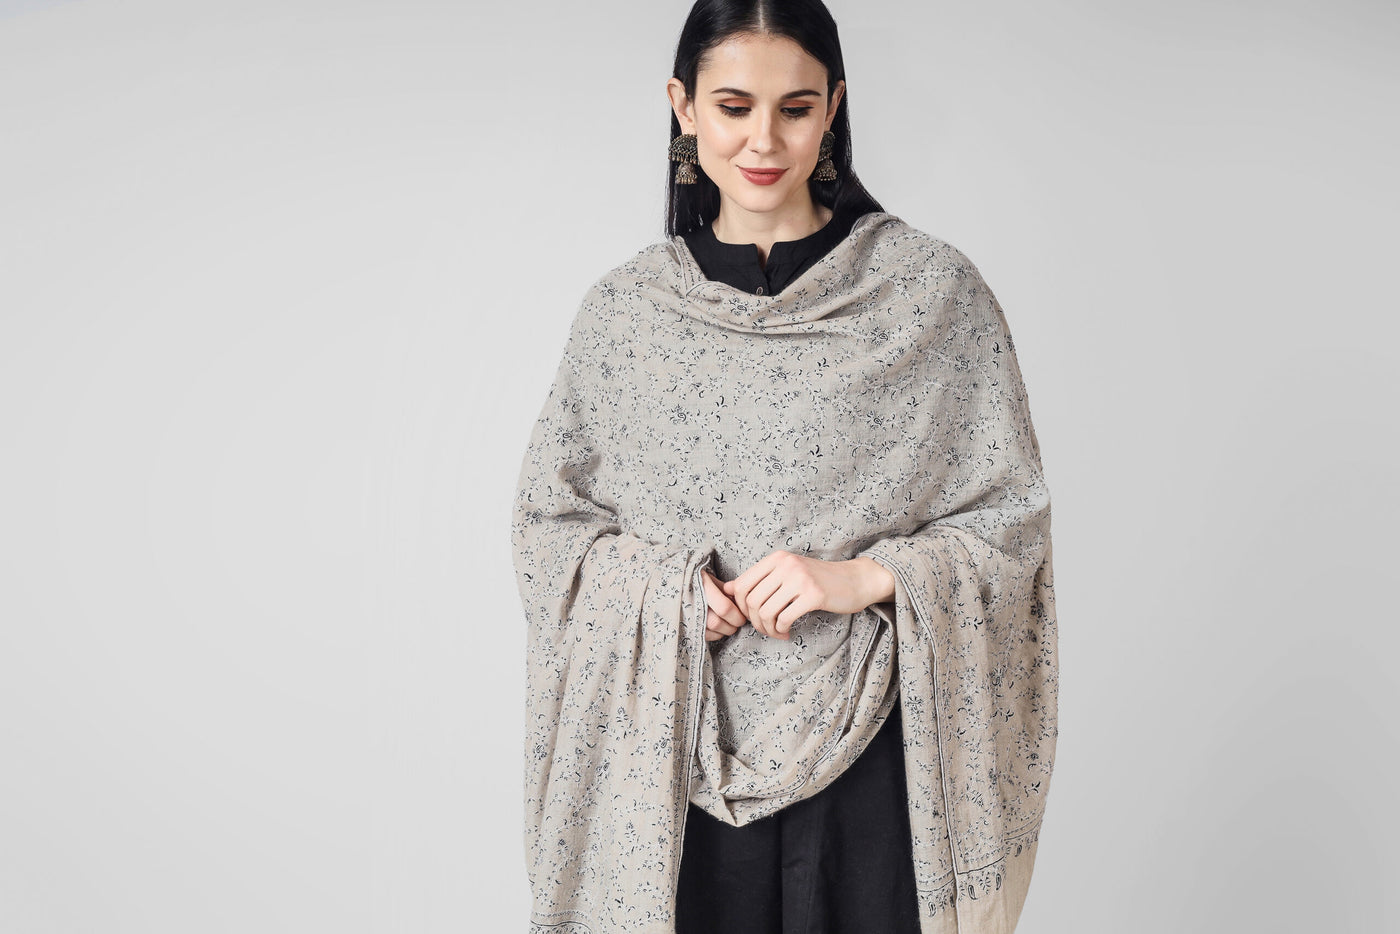 DUBAI- The Natural Pashmina Jaldaar Black & White Embroidered Shawl is an elegant and classic piece that is appropriate for any setting. Anybody who values luxury and taste must own it because of the premium fabrics, beautiful needlework, and distinctive design.